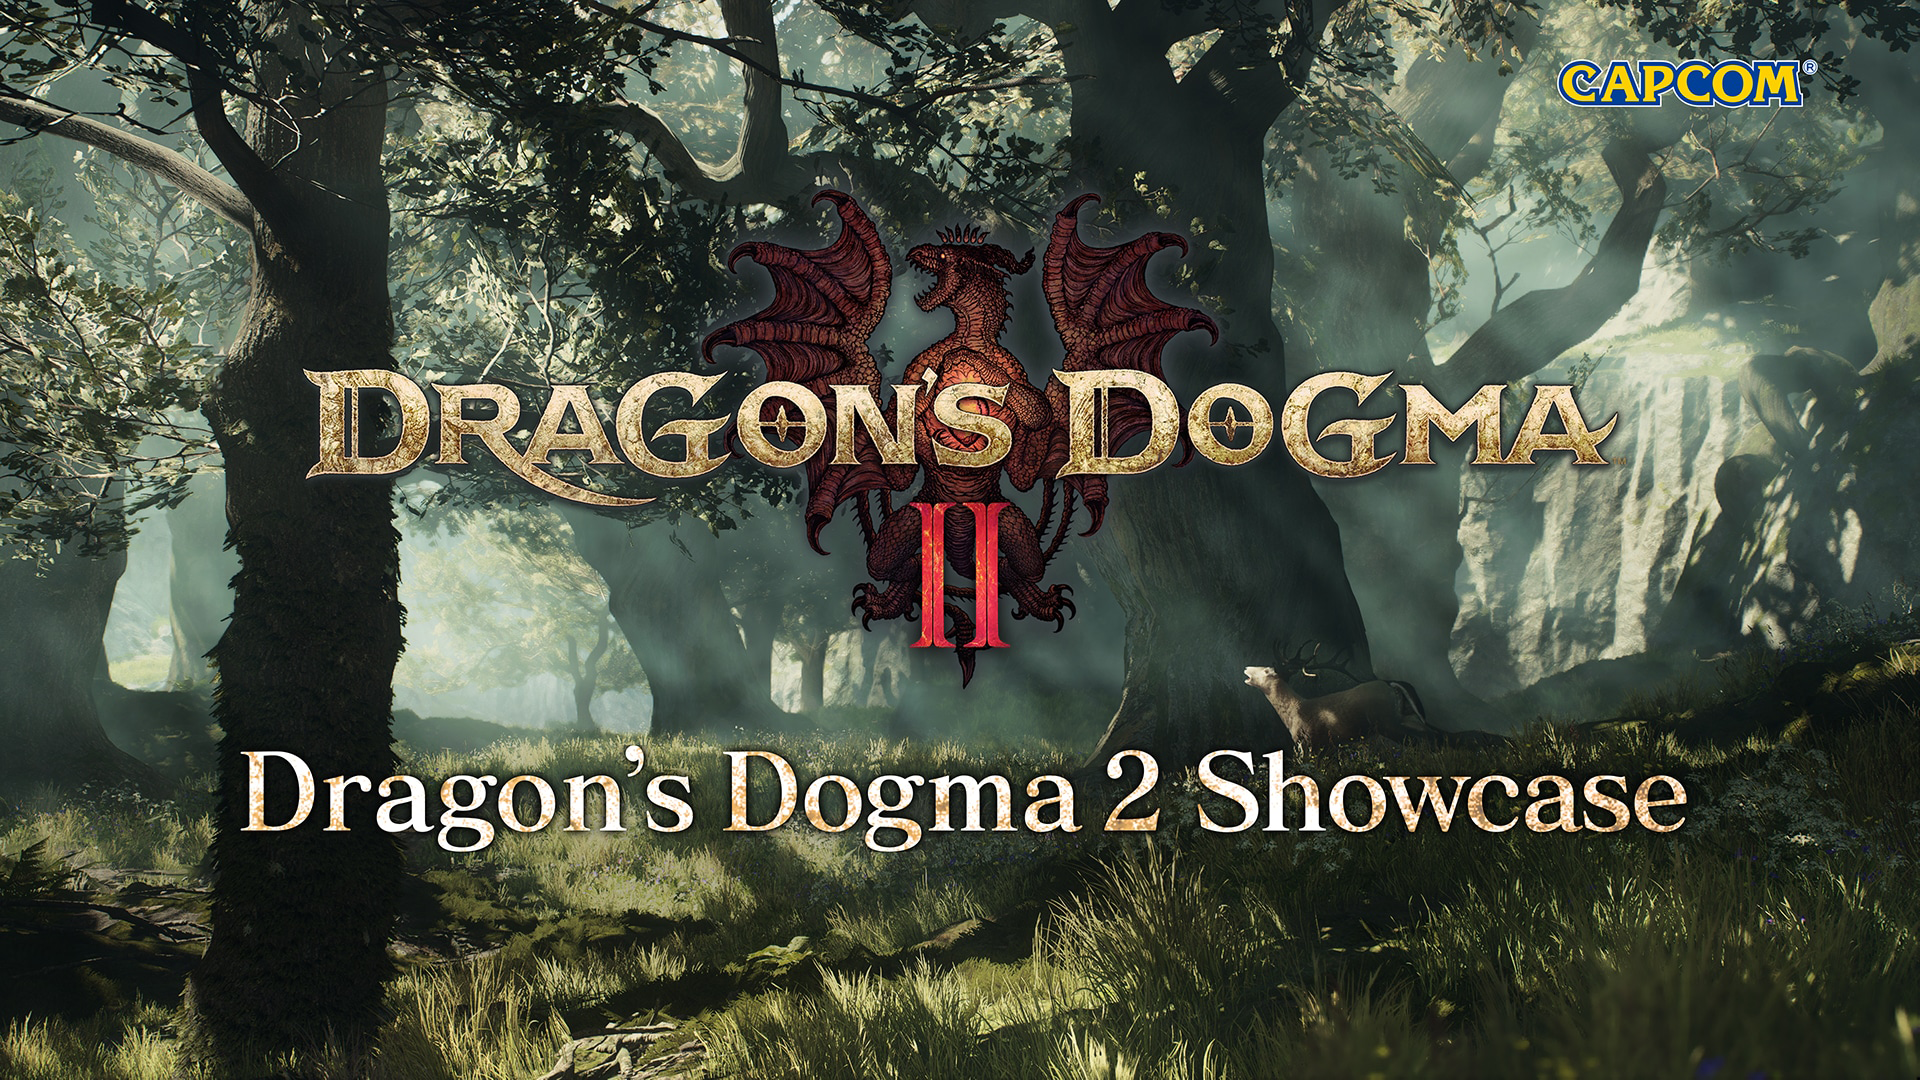 Dragon's Dogma 2 is hosting another showcase on November 28